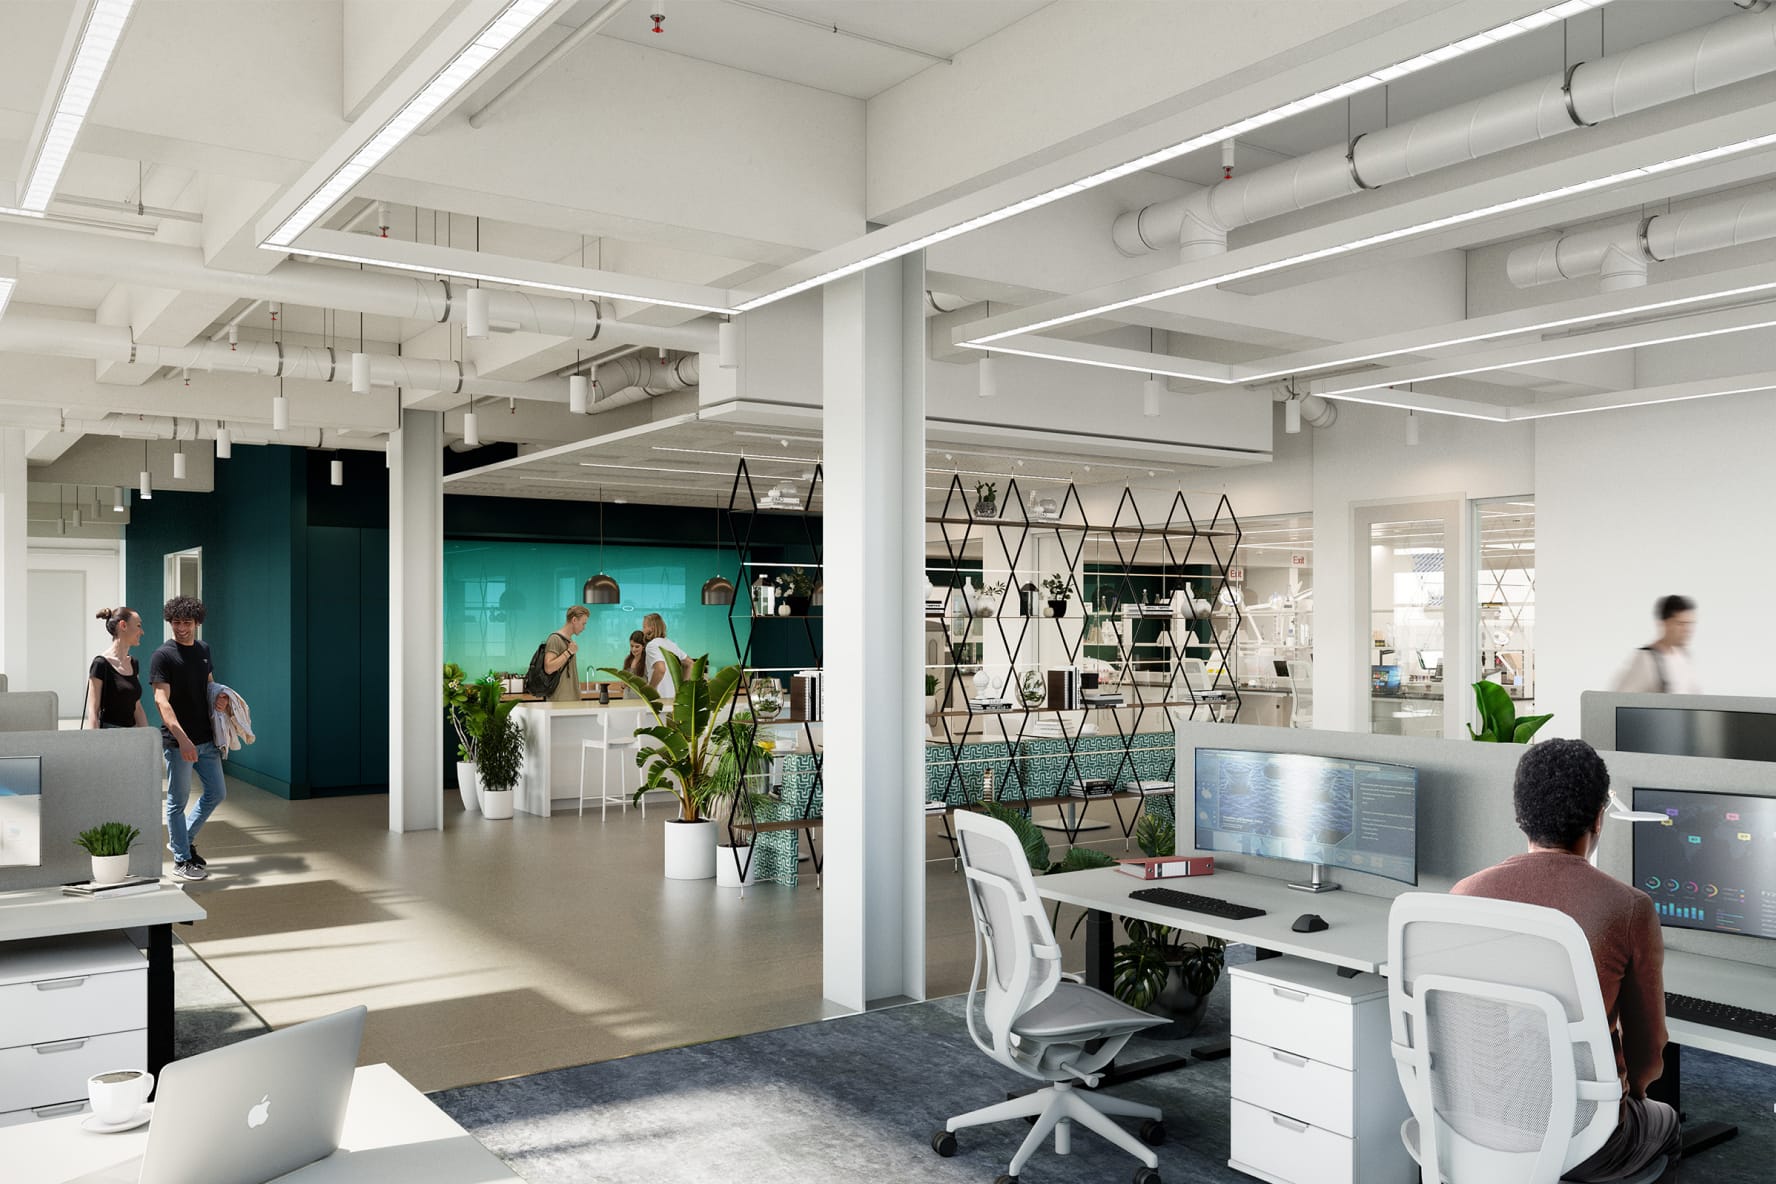 Open plan workspaces for collaboration